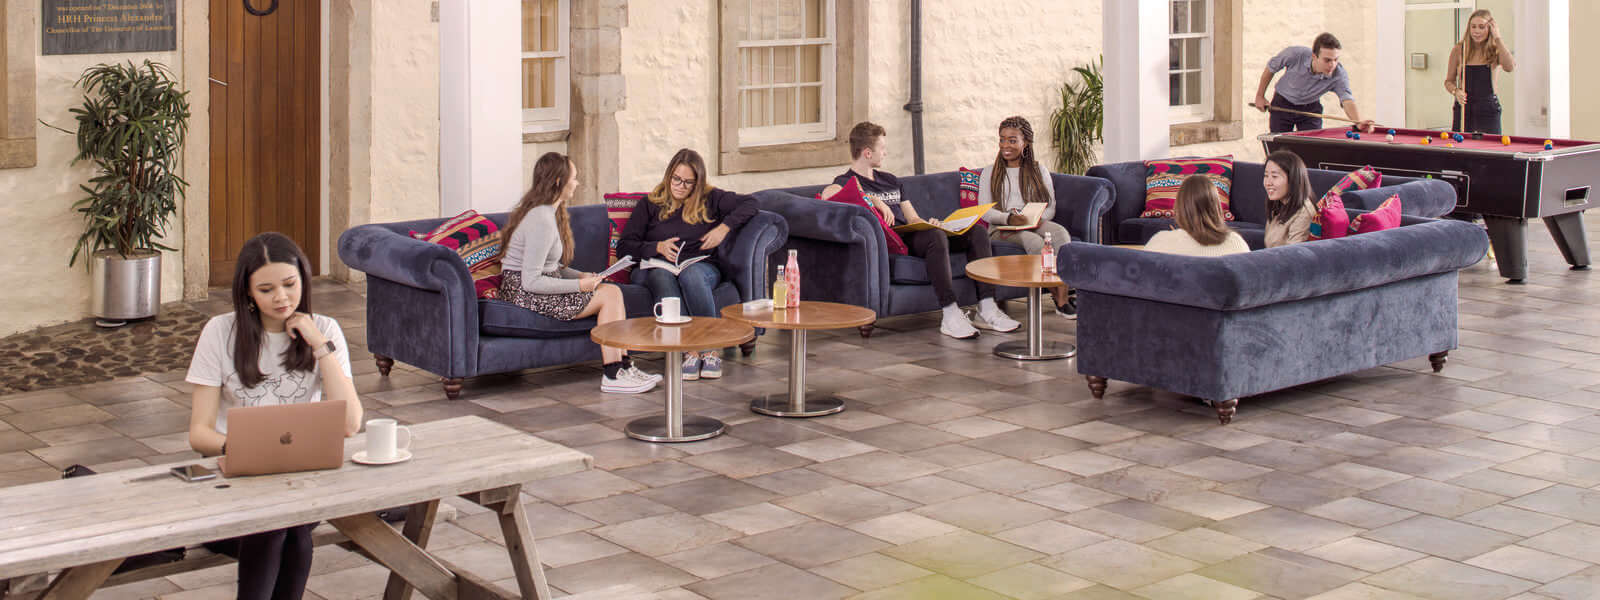 Students socialising in one of the college spaces